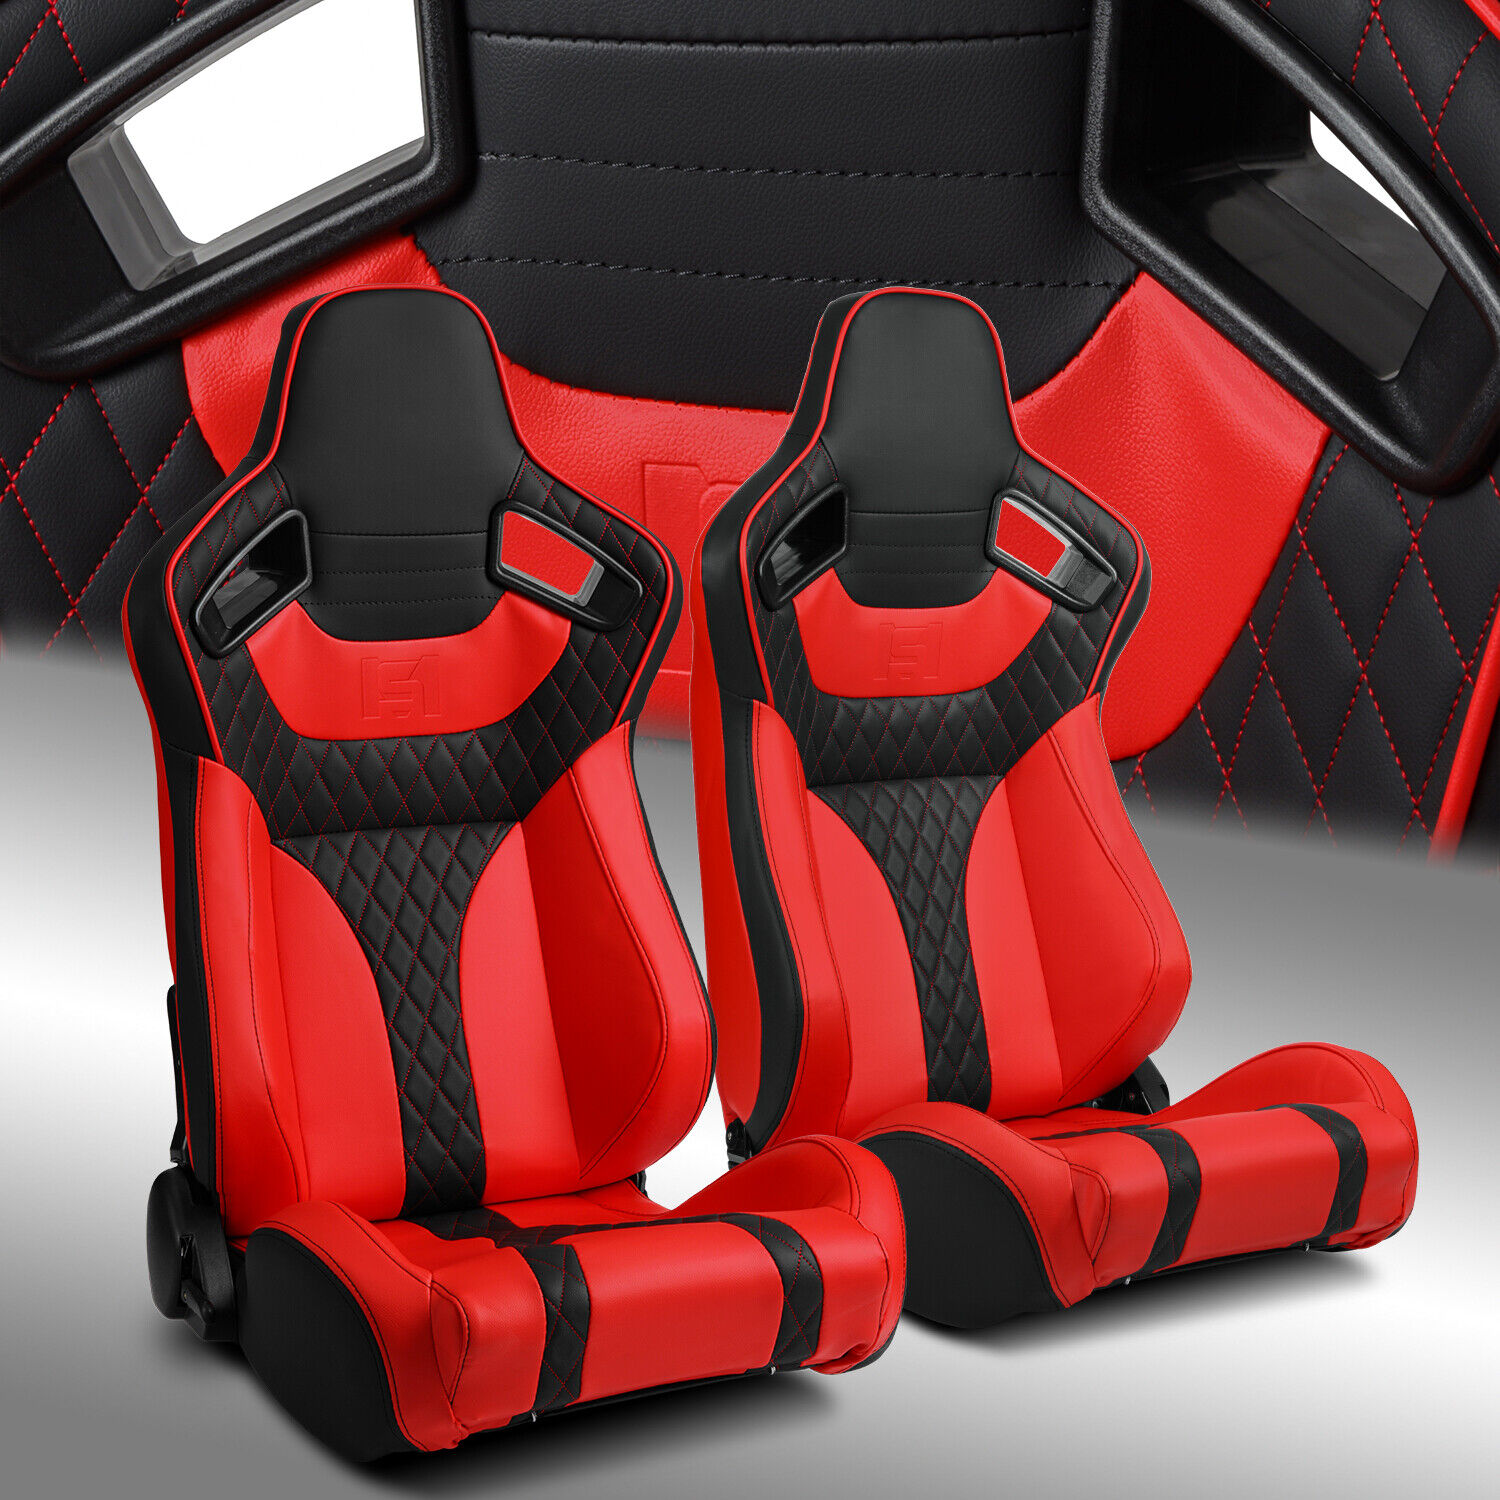 Universal Main Black+Red Side PVC Leather Sport Reclinable Racing Seats Pair